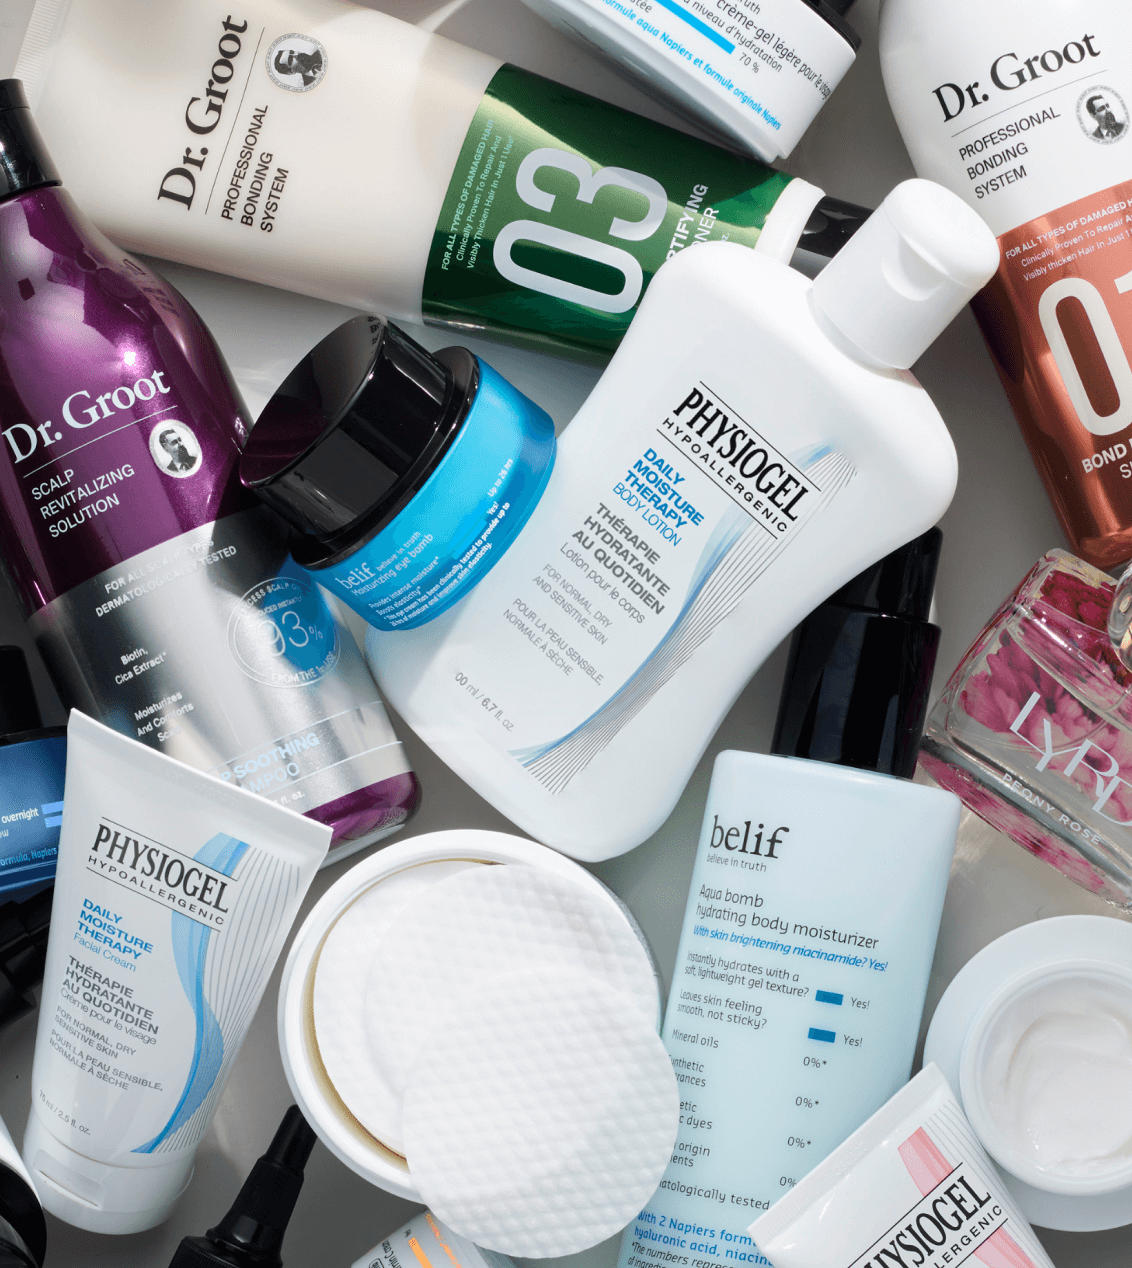 An assortment of LG Beauty products including skincare and hair care options.